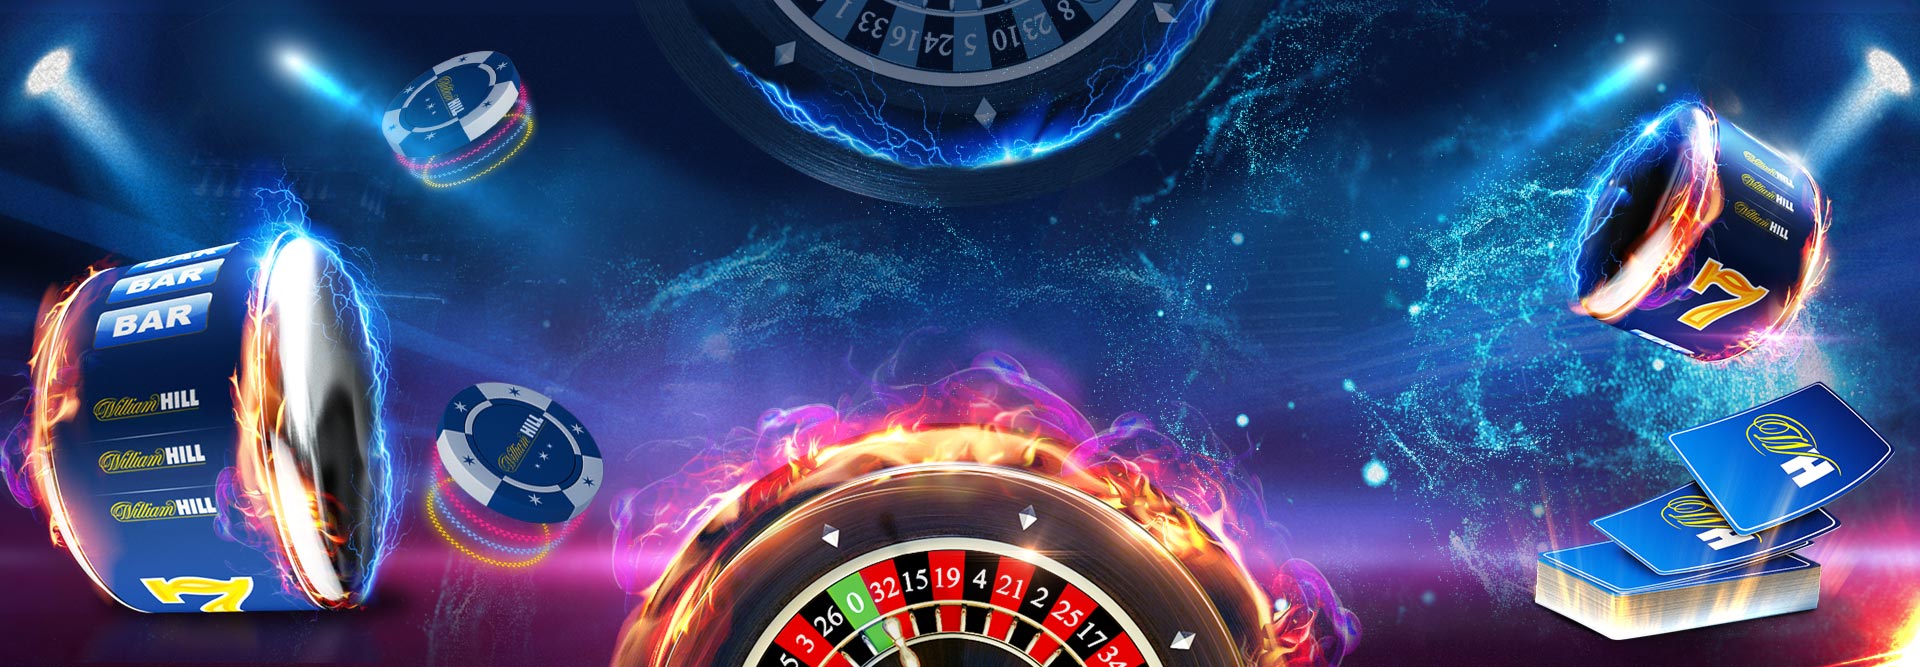 Dr bitcoin slot wheel of fortune